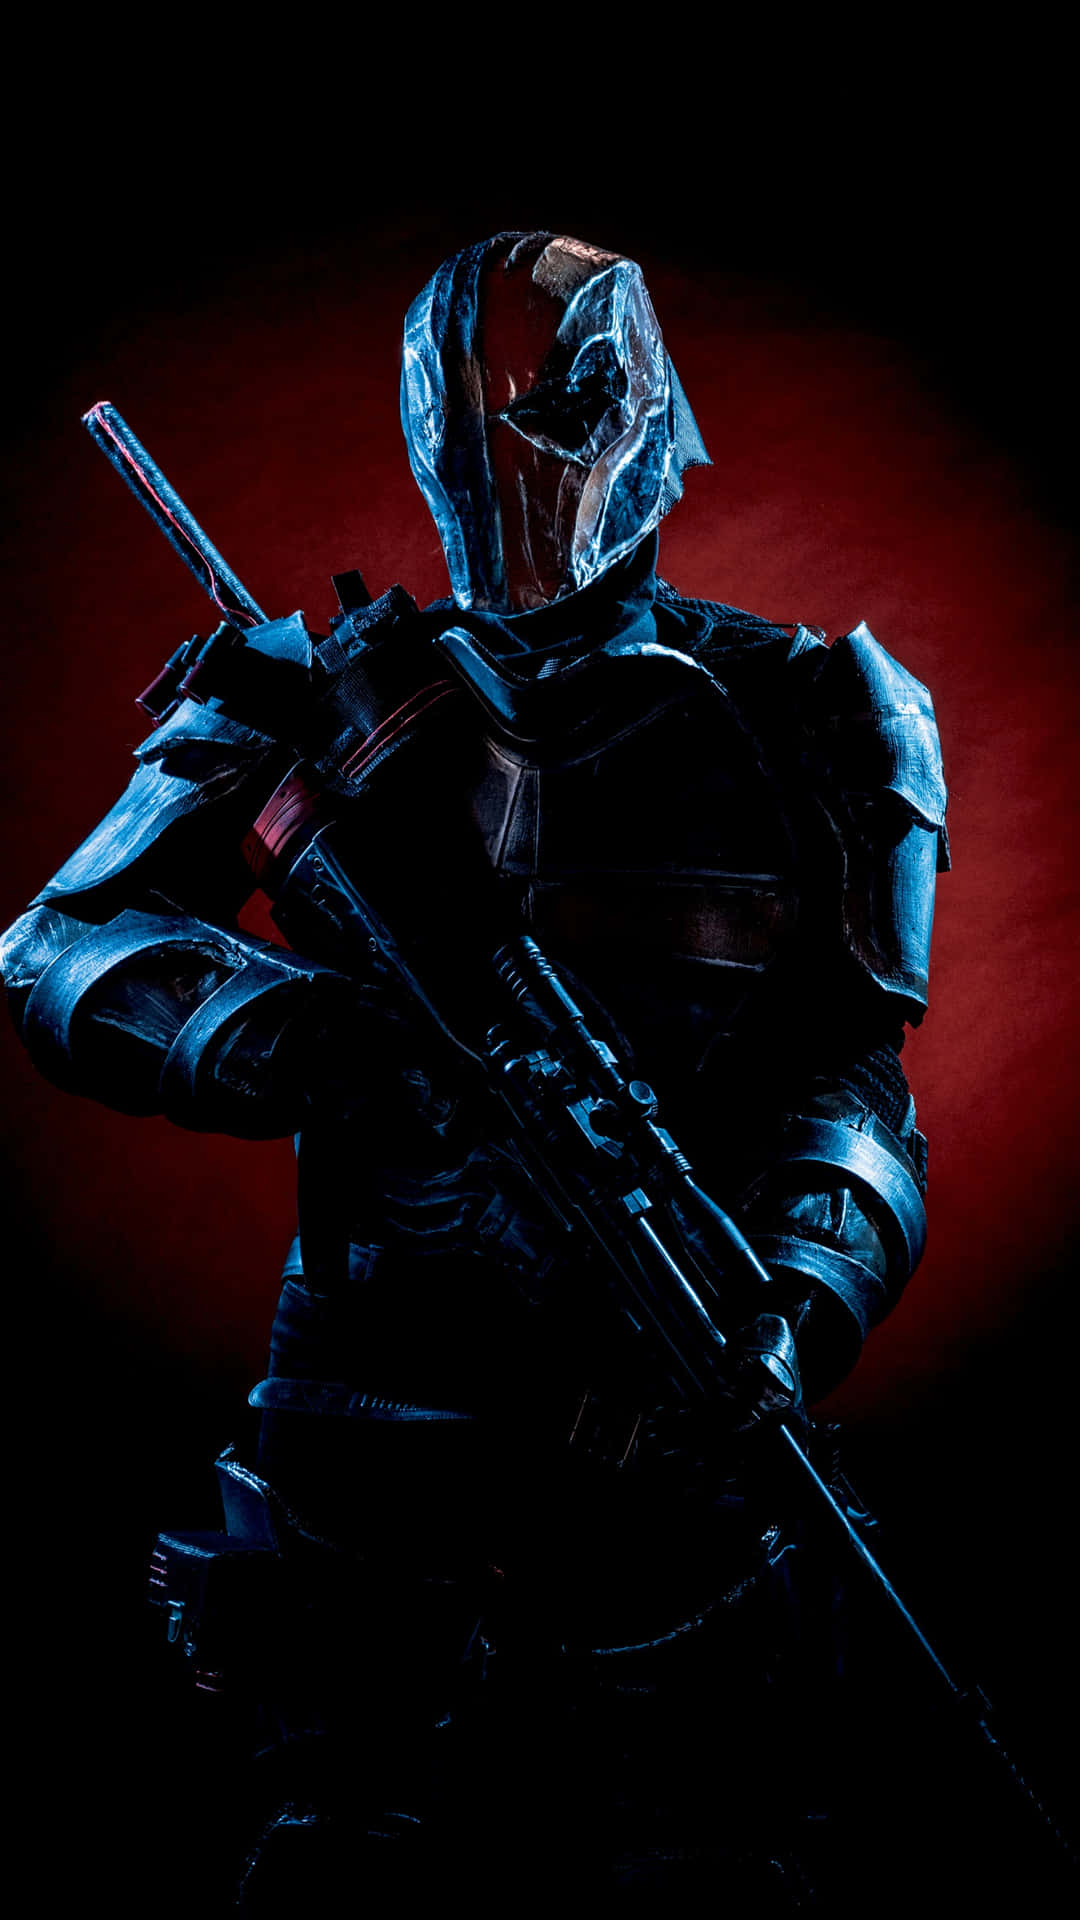 "Deathstroke, mercenary for hire and master of strategic combat."